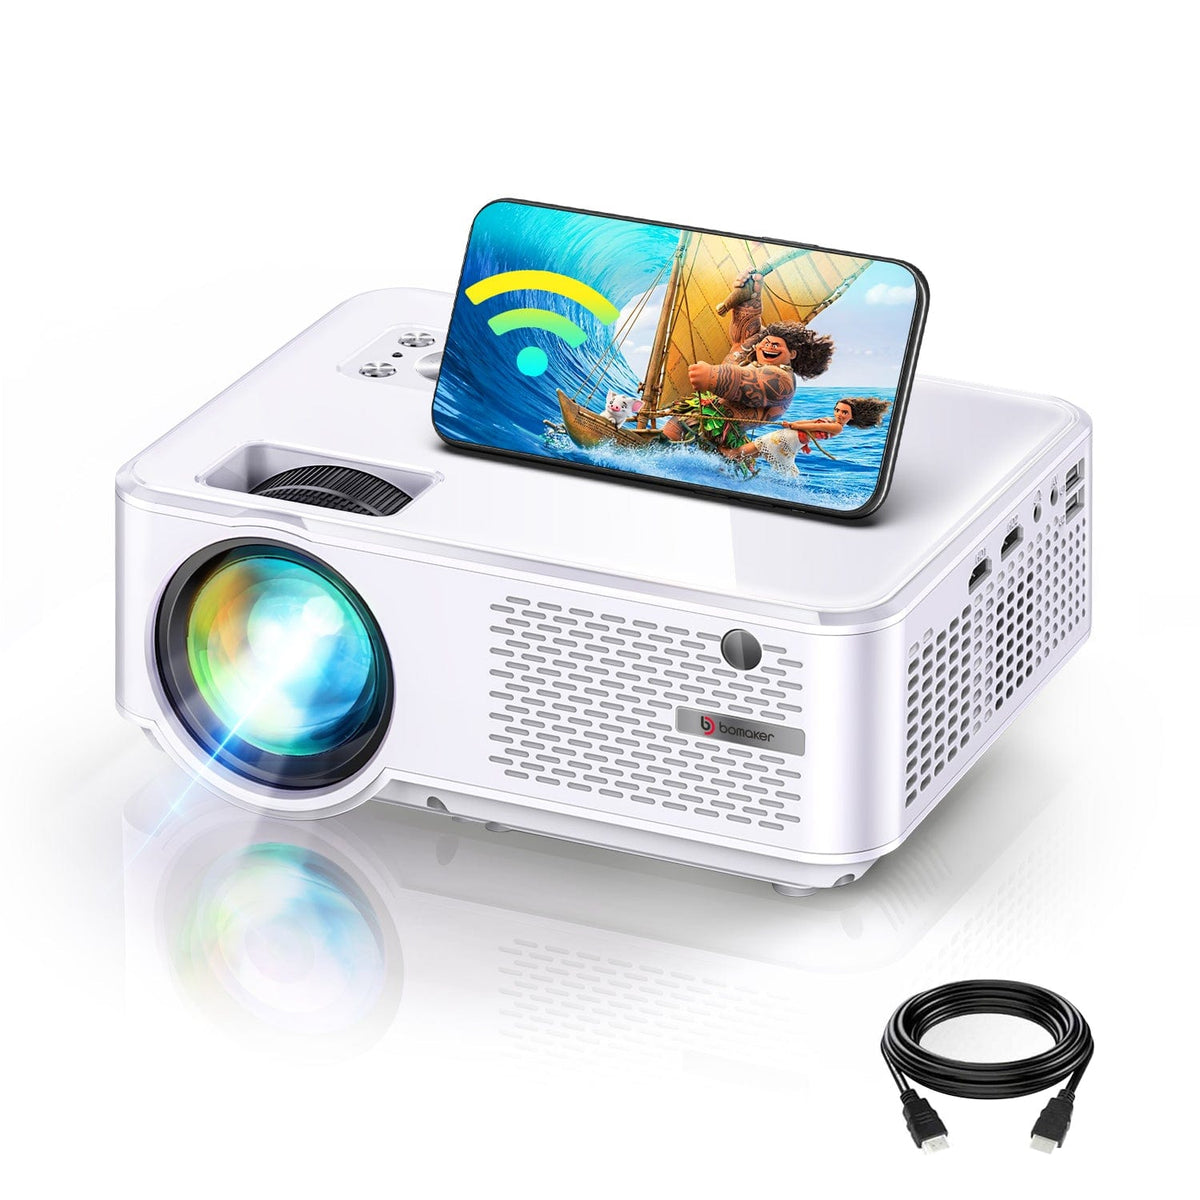 Auto Focus] Wimius Projector, Native 1080P Projector with WiFi and Bluetooth,  Smart Home Movie Projector 4K Support, 300 Large Screen, for iOS/Android 